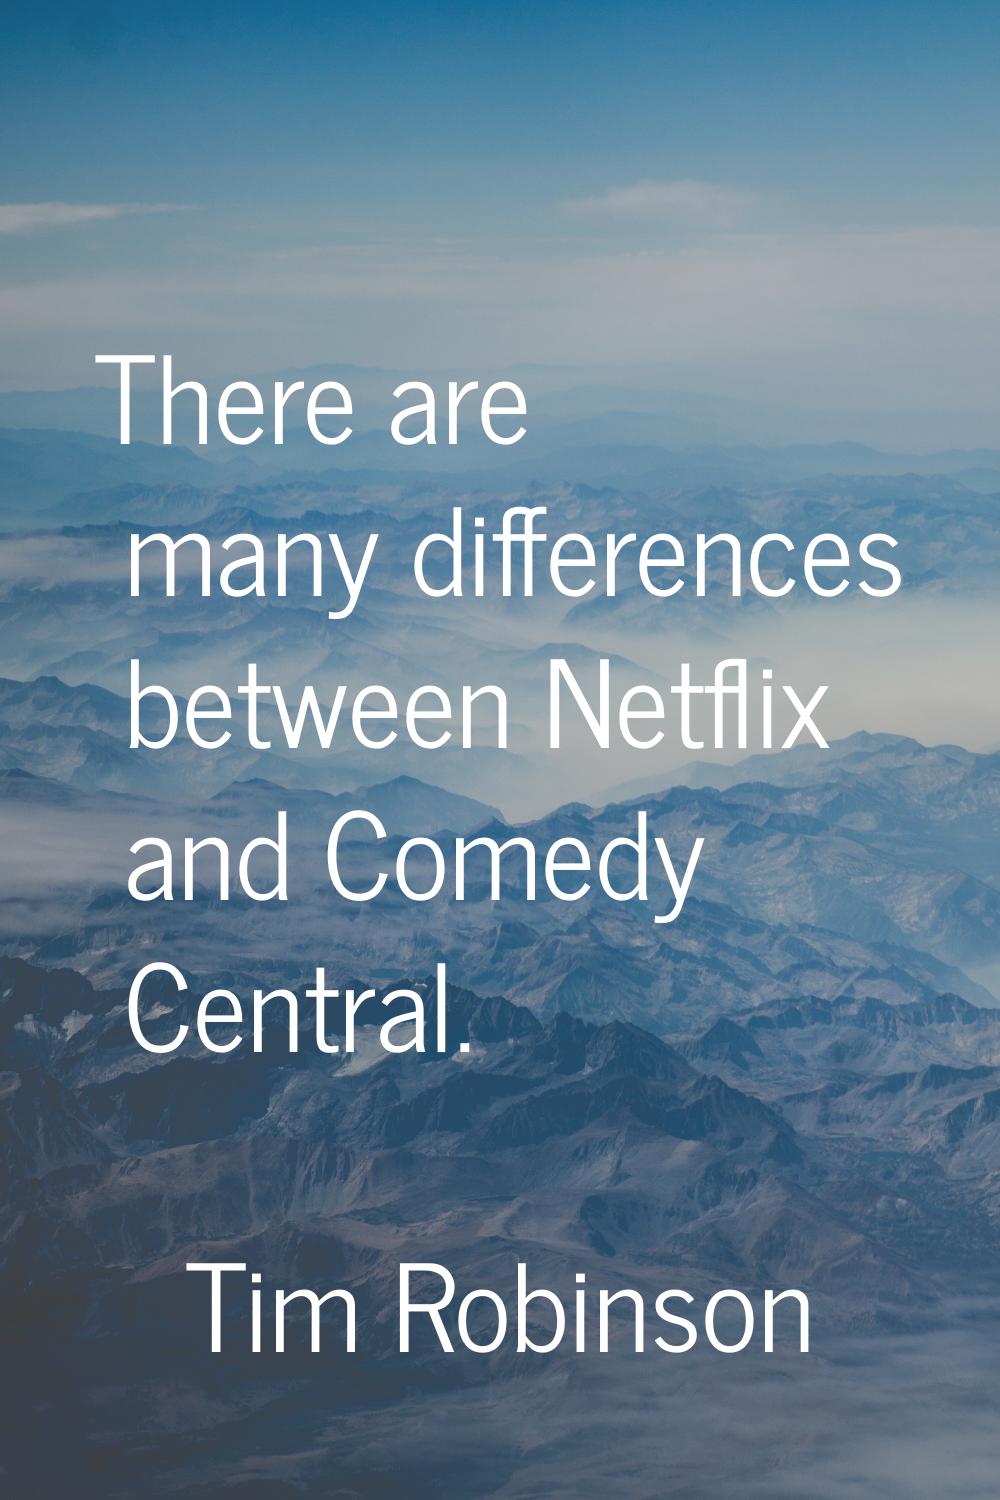 There are many differences between Netflix and Comedy Central.